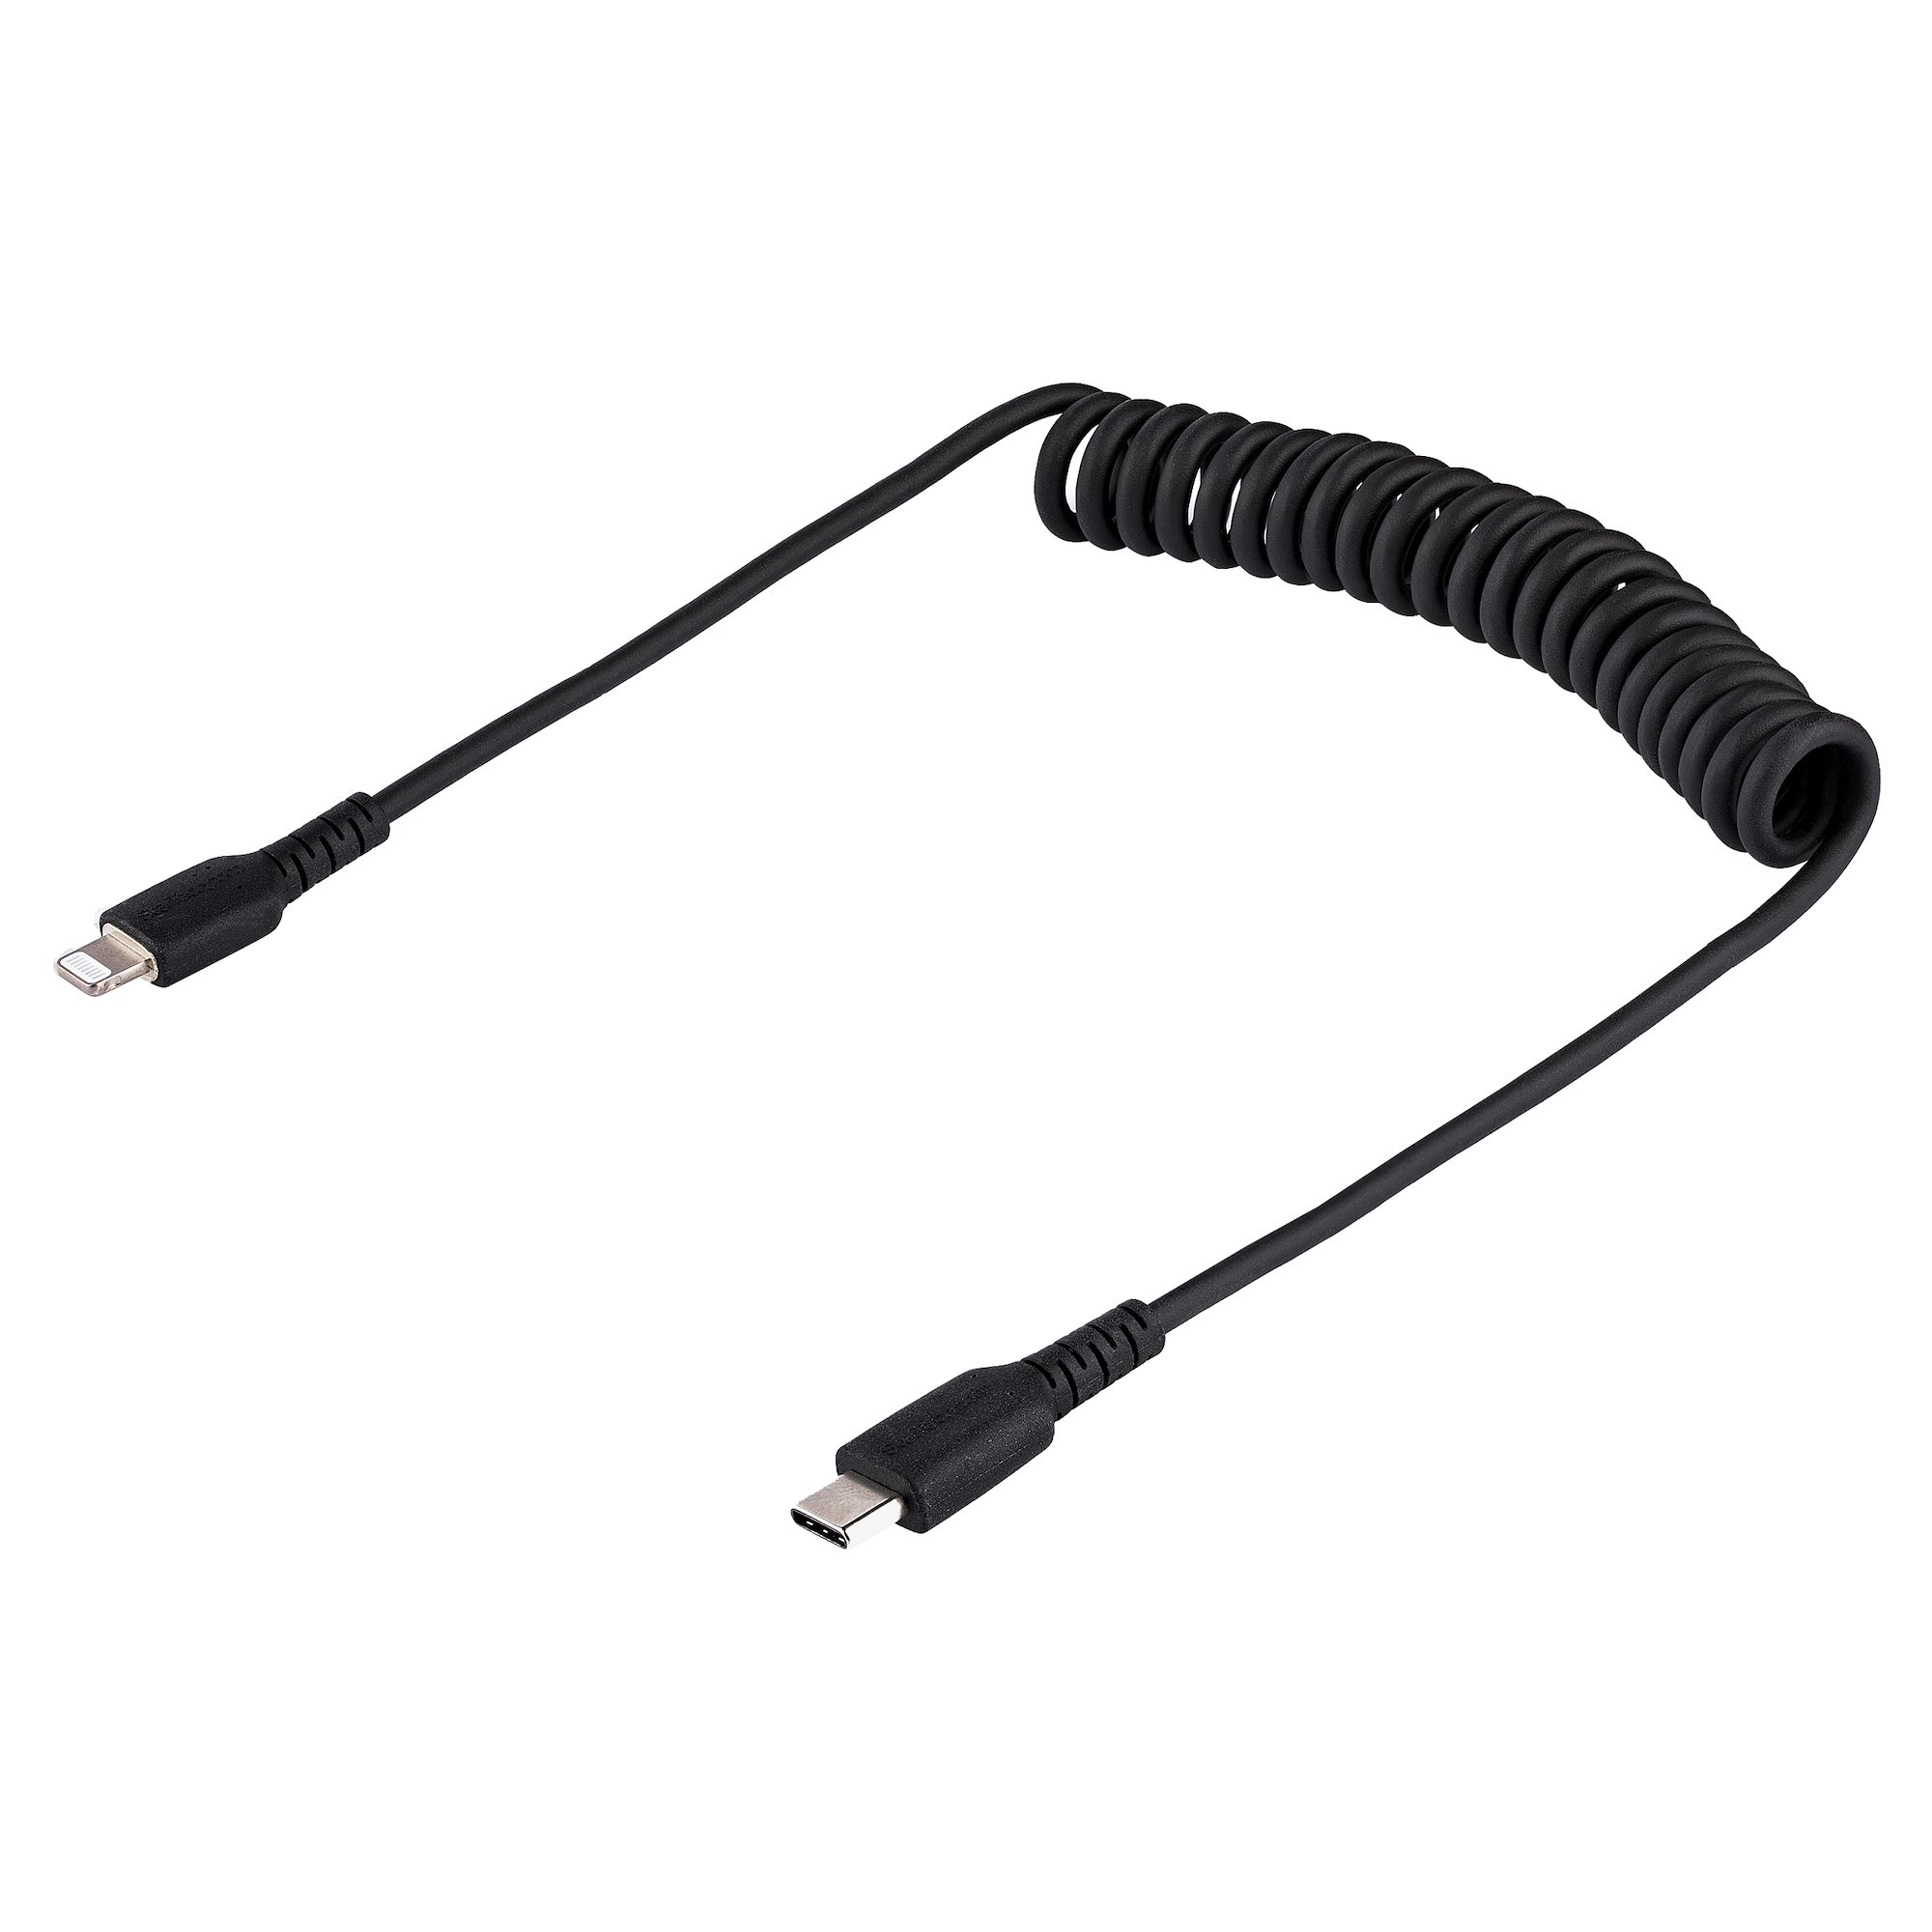 Startech .com 20in (50cm) USB C Charging Cable, Coiled Heavy Duty Fast  Charge & Sync USB-C Cable, High Quality USB 2.0 Type-C Cable, R2CCC-50C- USB-CABLE - Corporate Armor